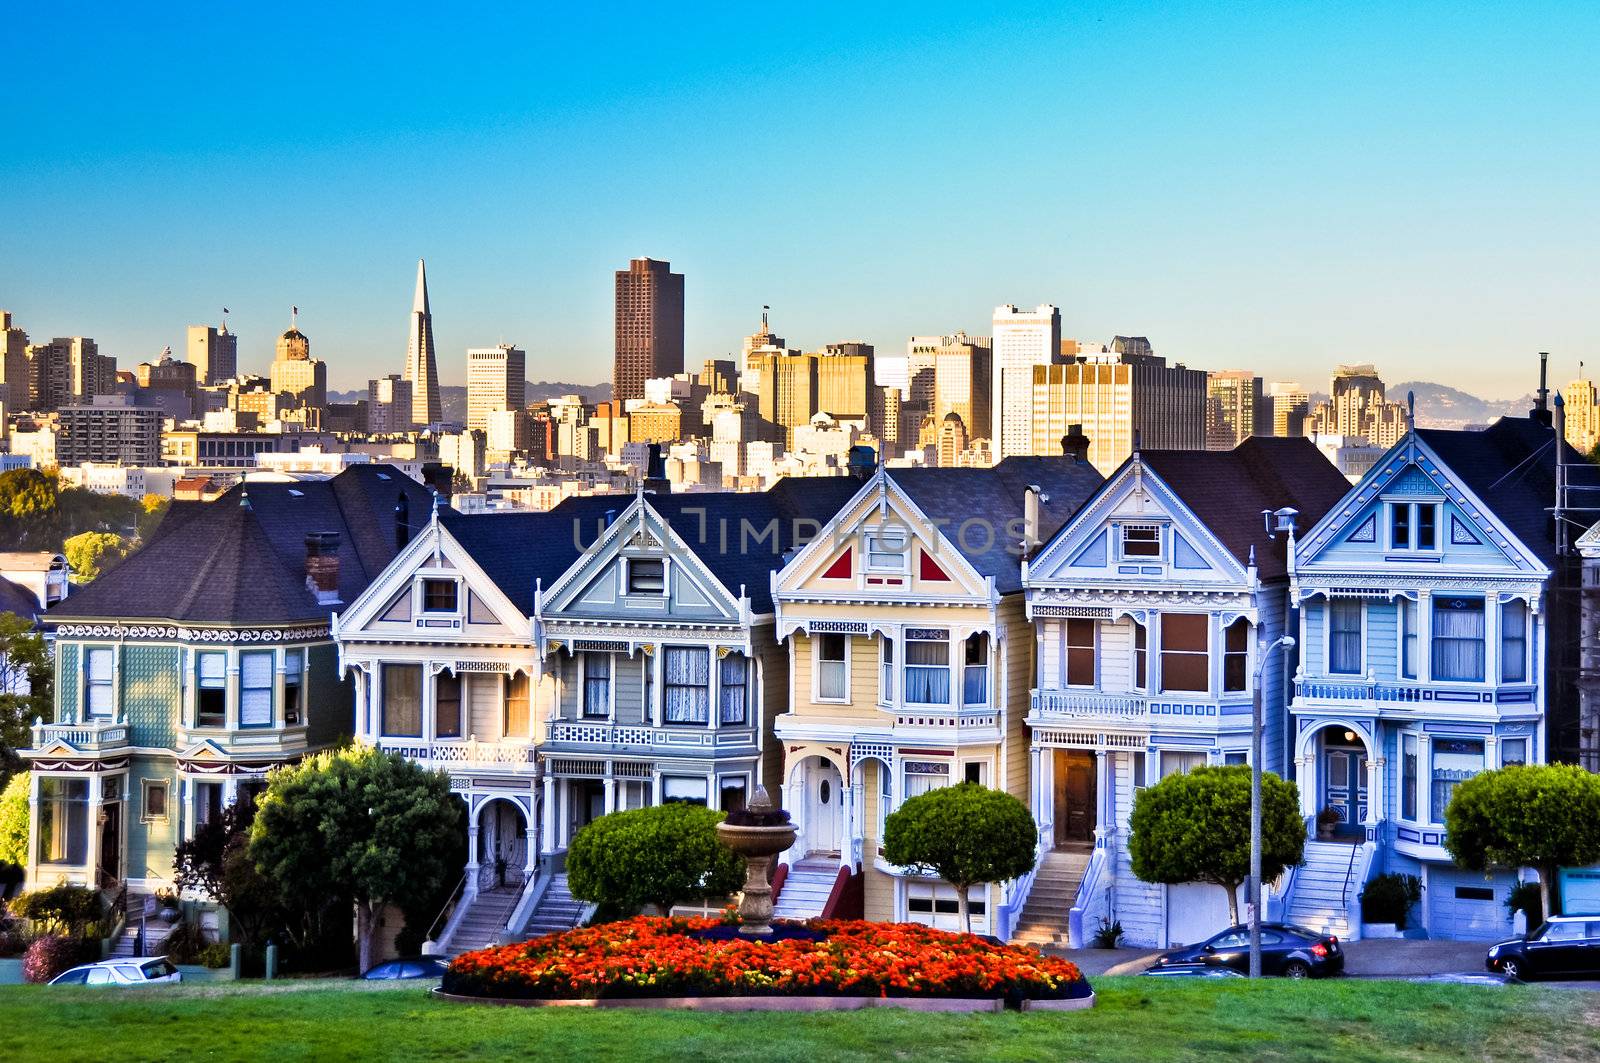 San francisco victorian houses at Alamo square by martinm303